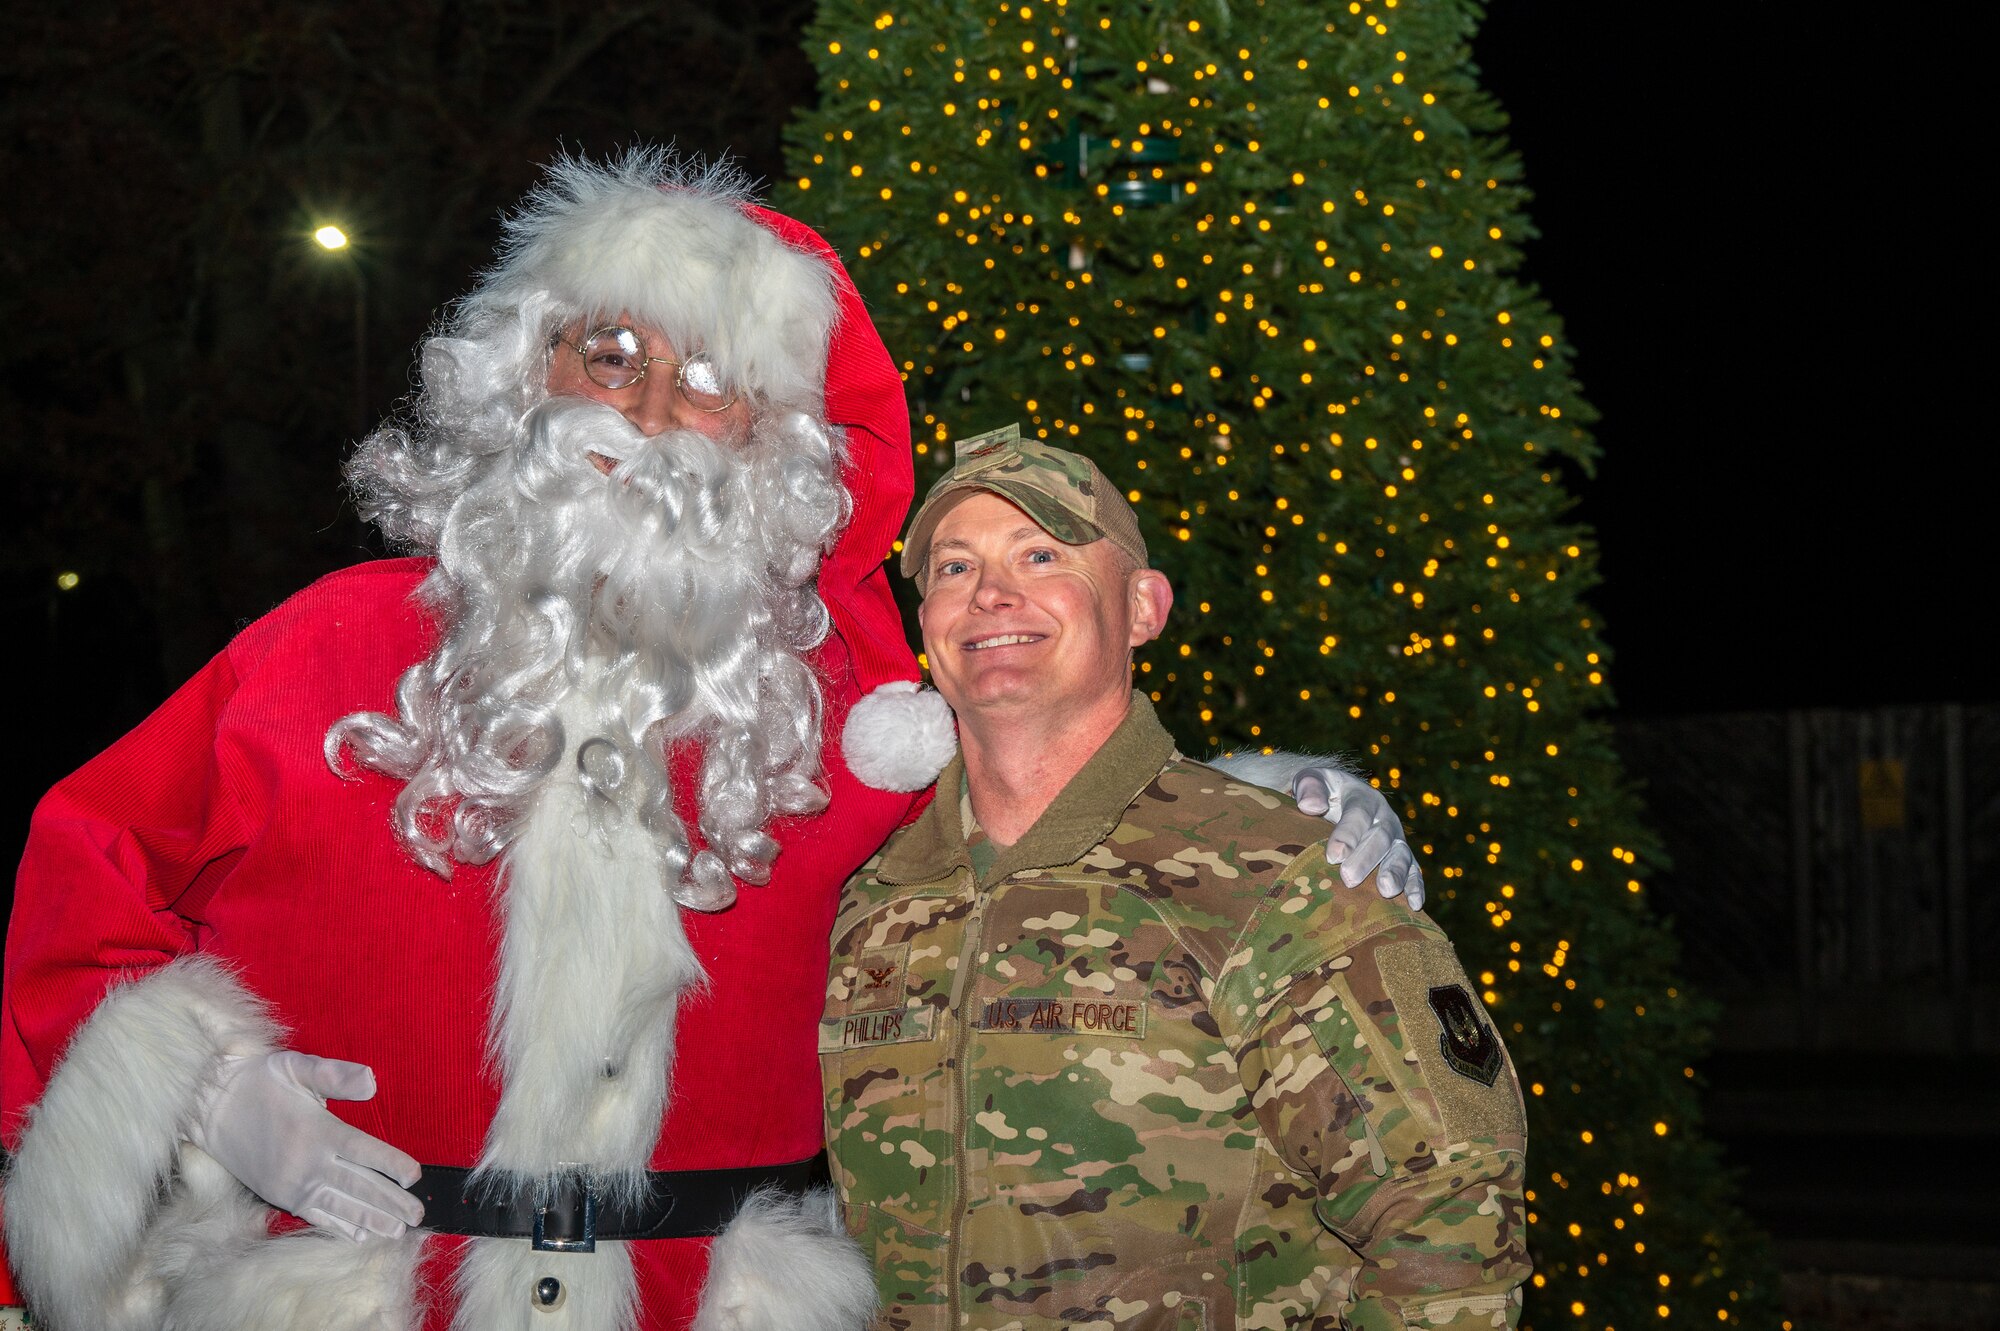 Santa and the base commander pose for a photo in front of a Christmas tree.